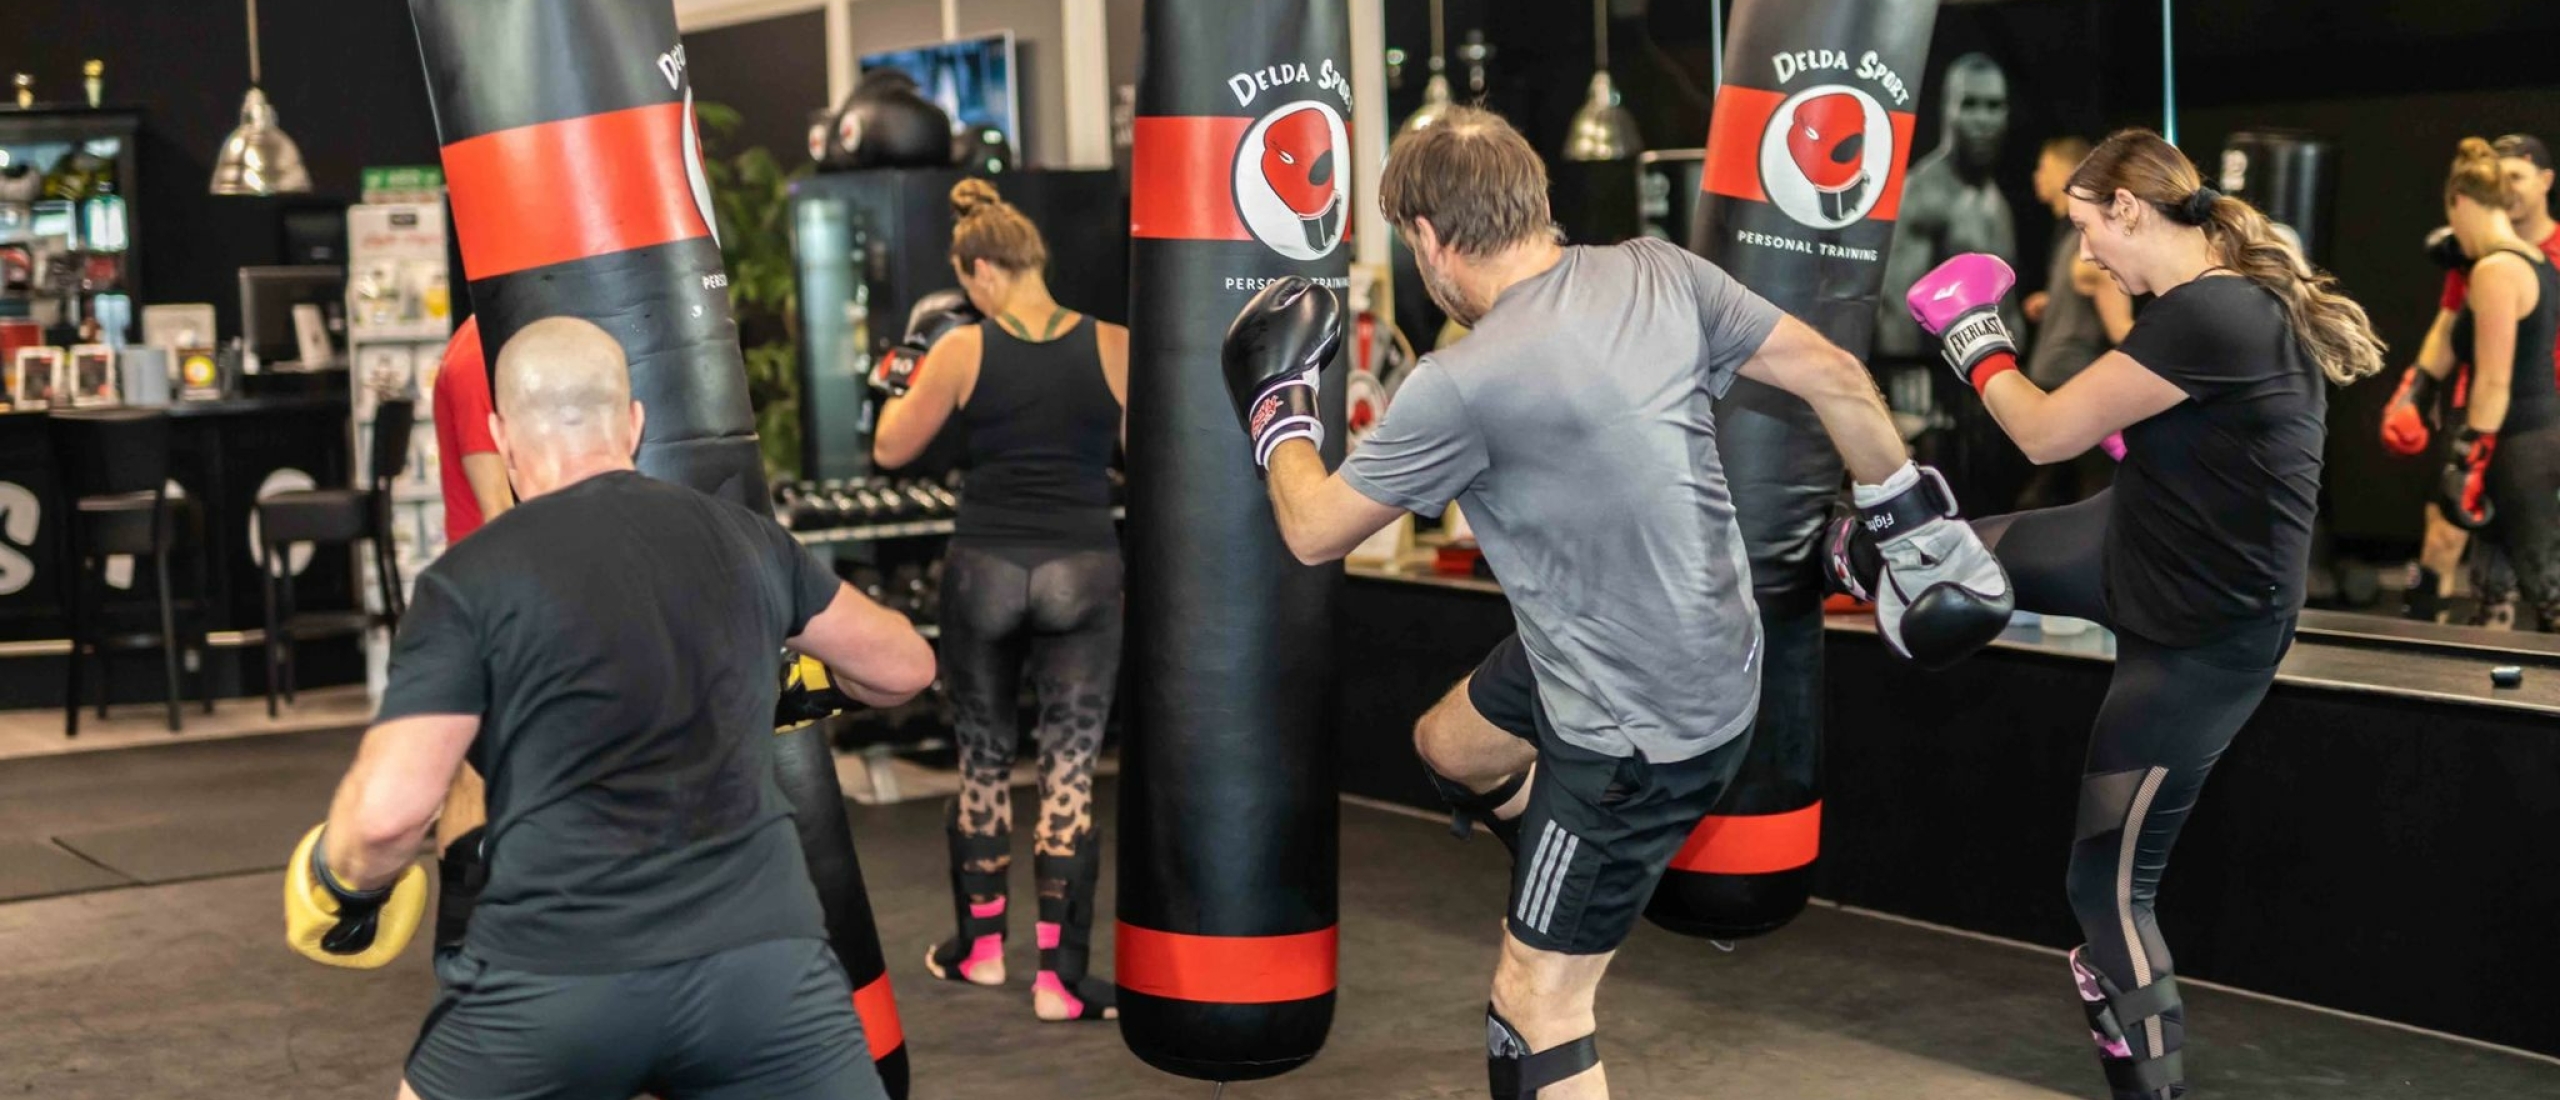 All You Need to Know About Cardio Kickboxing